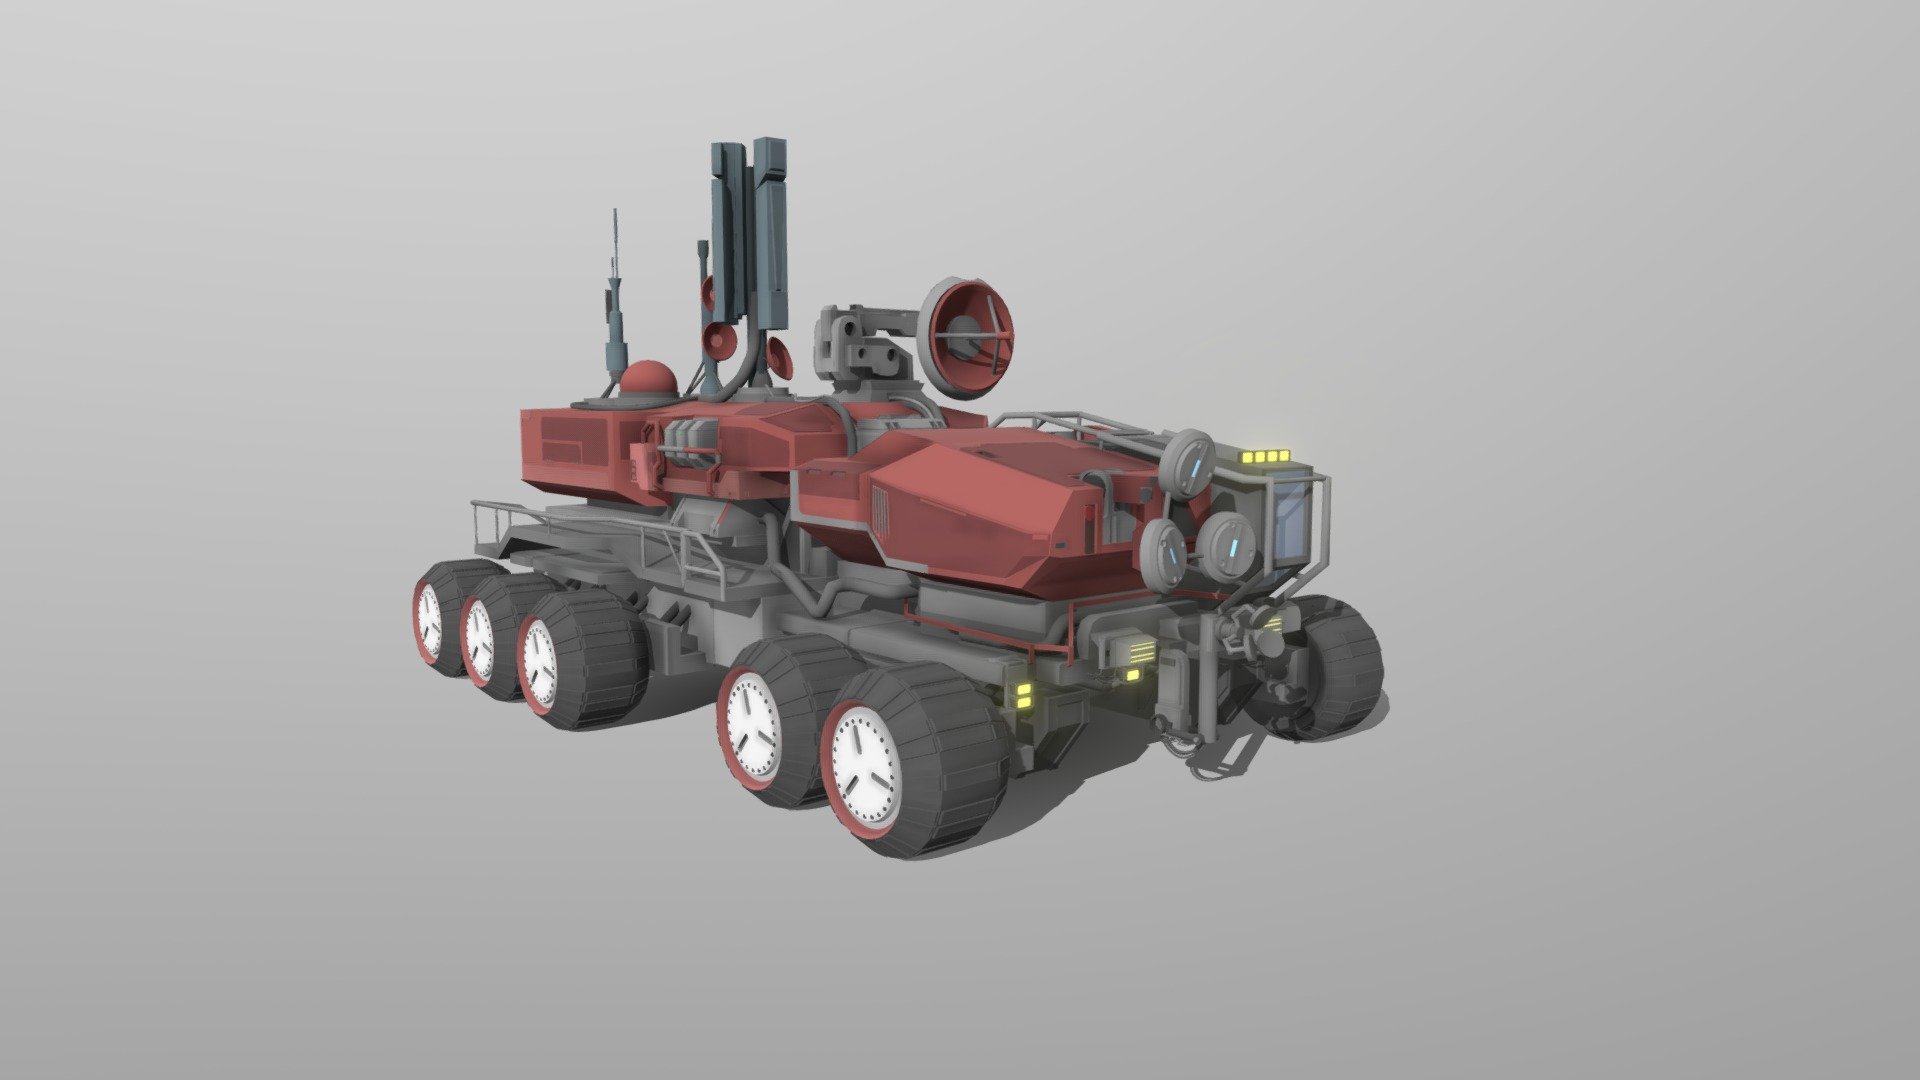 Moon Rover draft by concept https://www.artstation.com/artwork/g84gbK.
In the future I plan to make a game ready model out of it 3d model